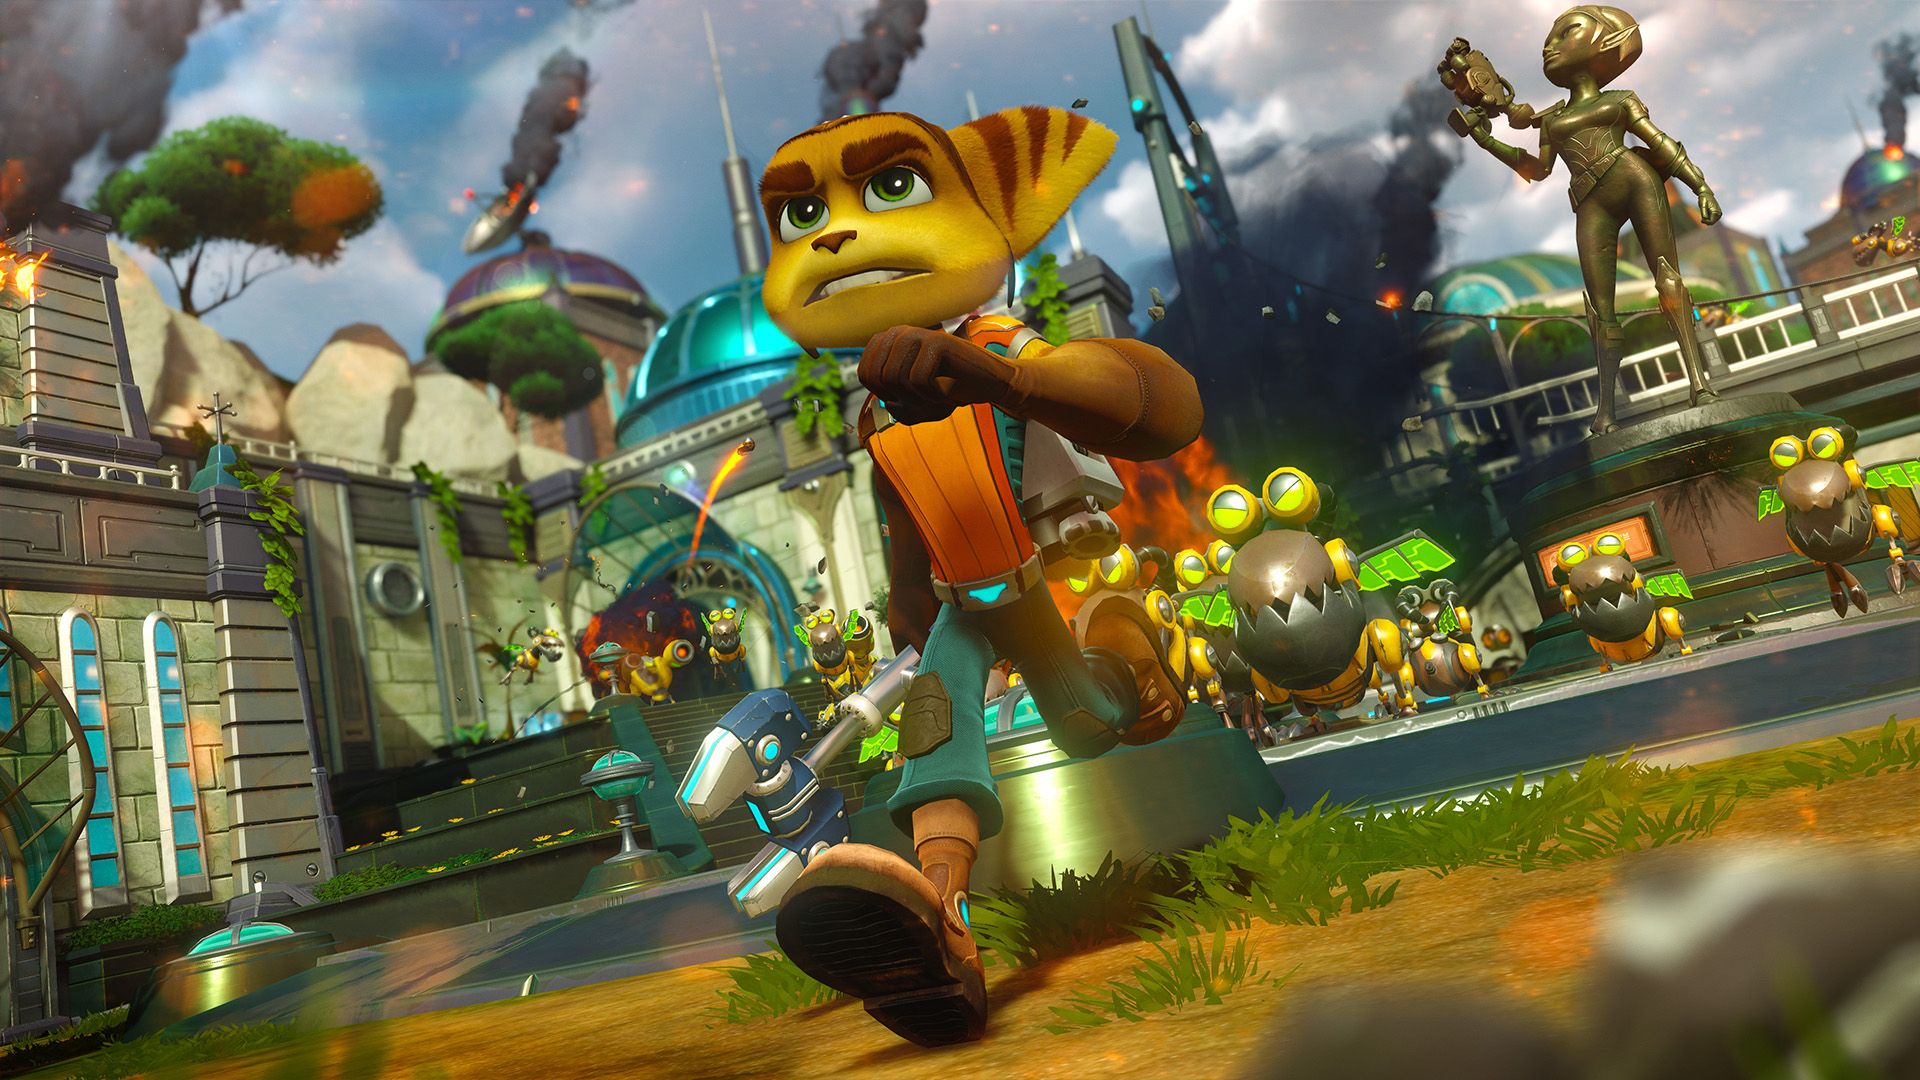 ratchet clank 2016 review image 1